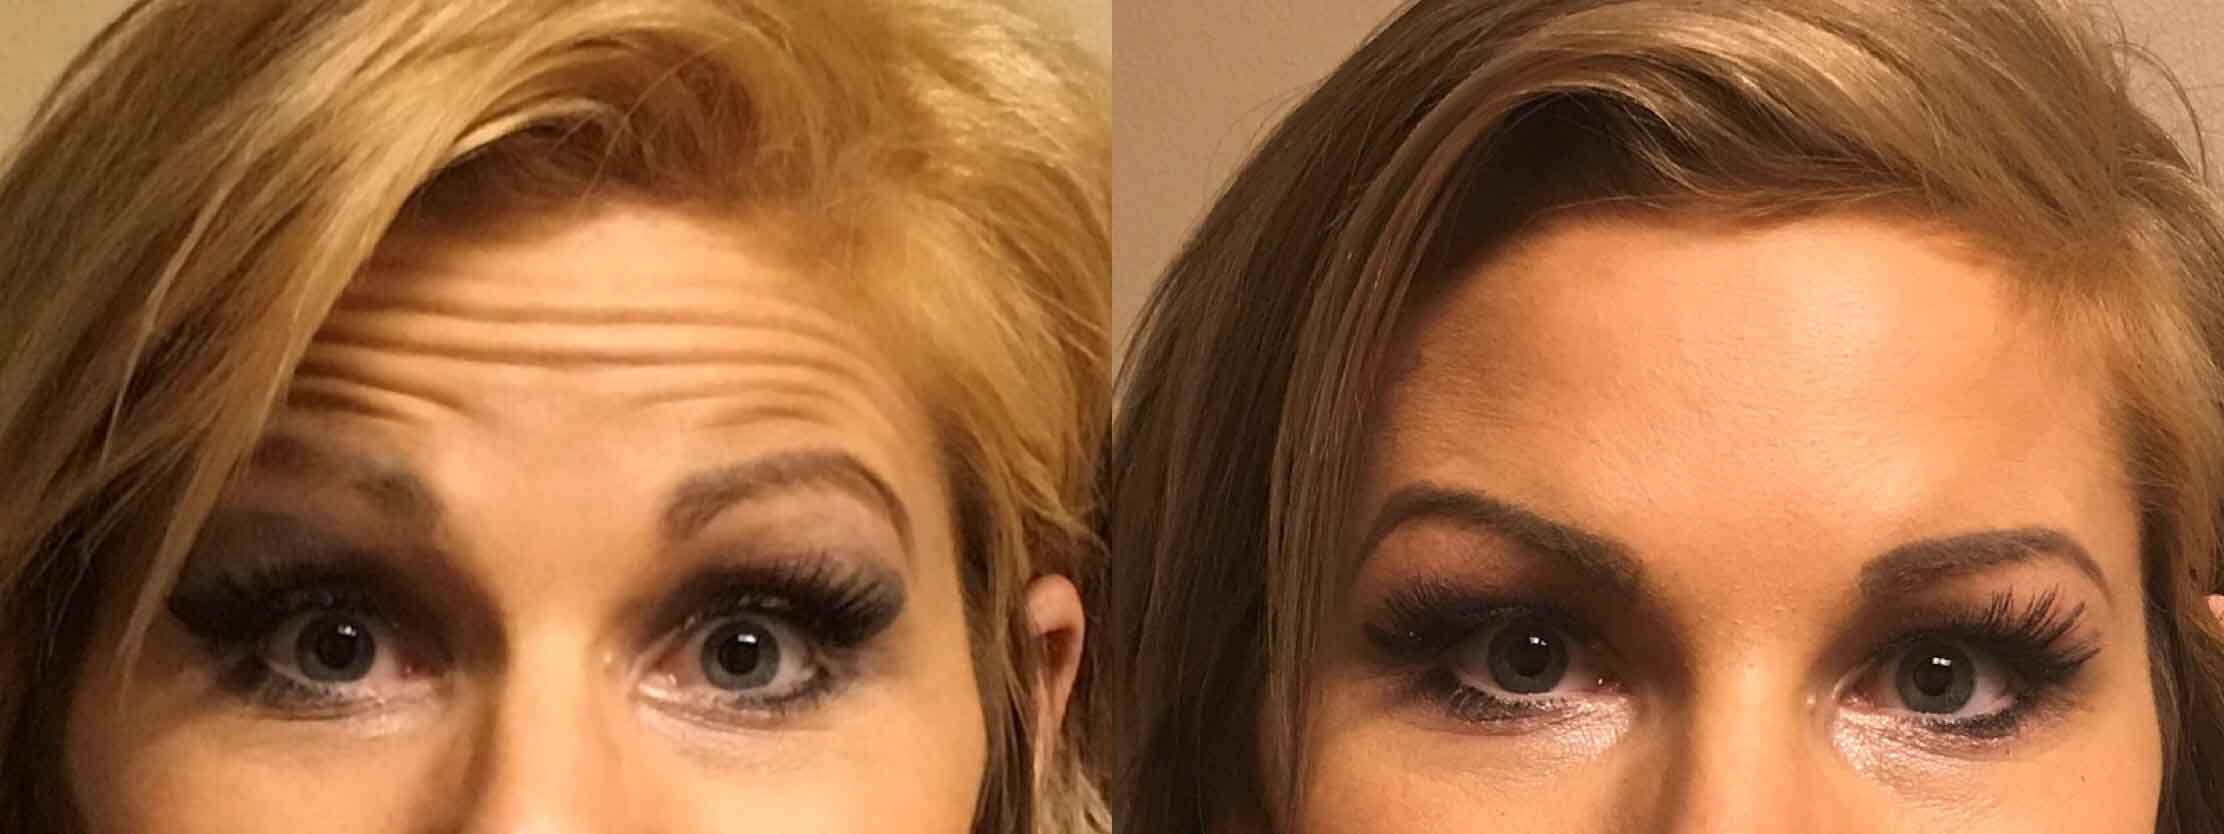 A before and After Comparison of a patient who received a botox treatment at seattle plastic surgery